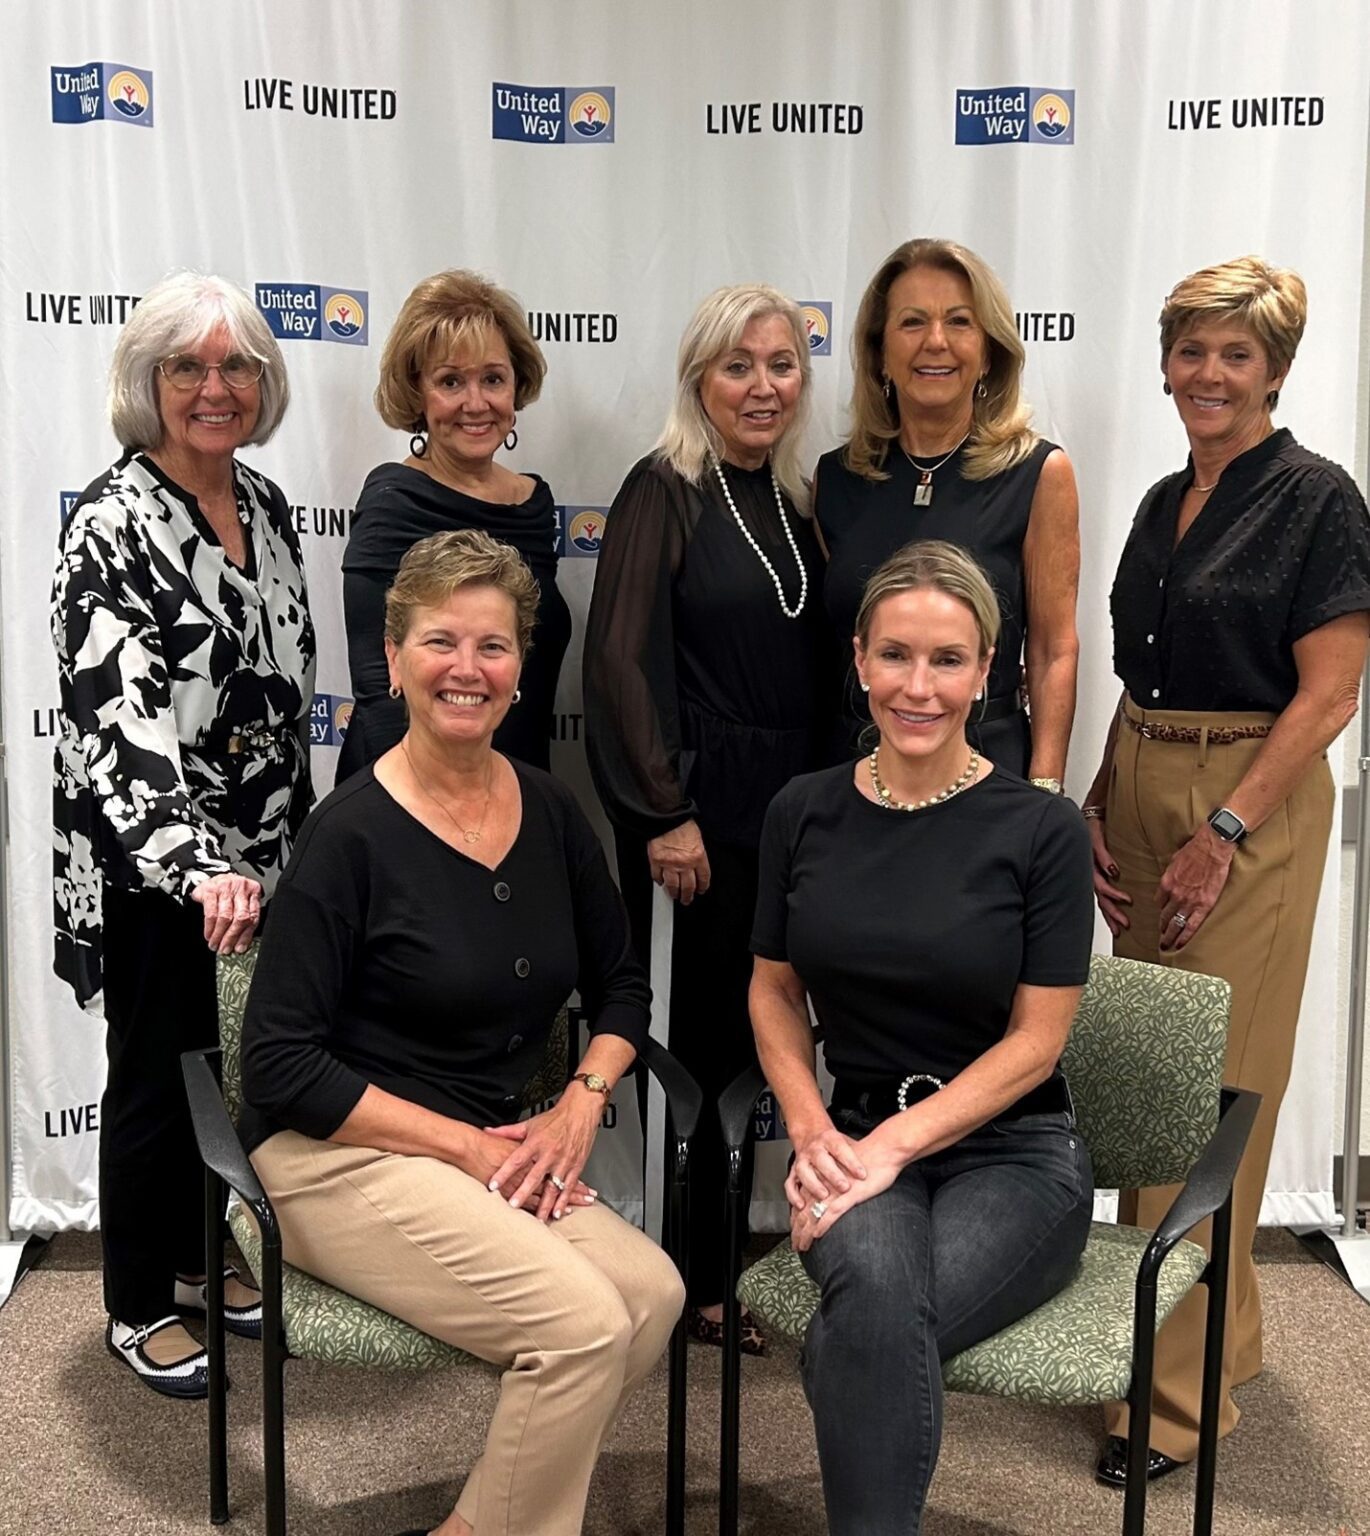 From left to right – Back row: Jacquelyn Kelley, Toni Patterson, Lucia Zaikov, Monica Wonnenberg, Megan Martin. Front Row: Dr. Mary Yankaskas and Kellie Urban, Chairman. Not in attendance: Jean Kaske, Jim Nathan, and Nancy Squires